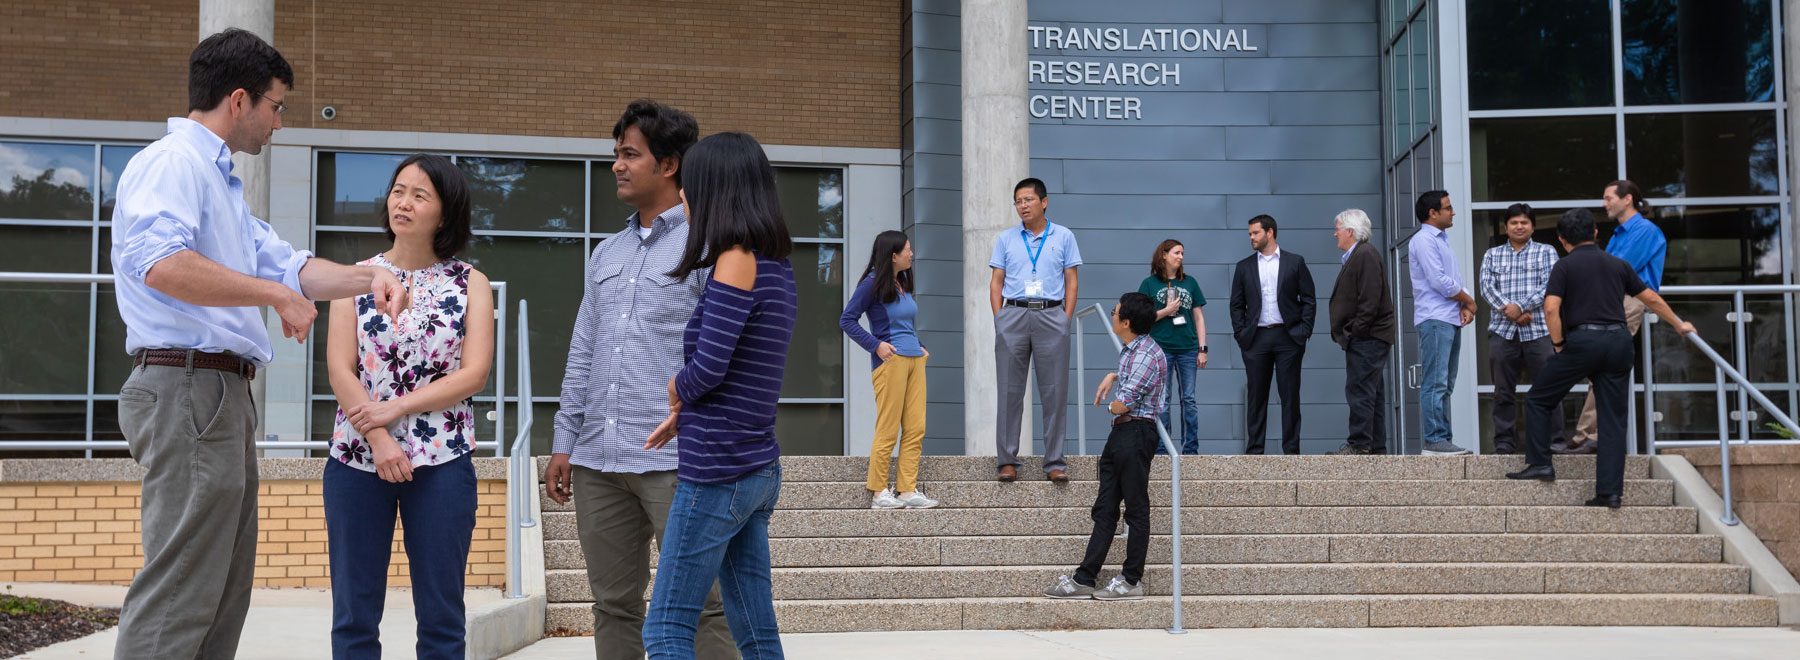 Students and faculty in front of the Translational Research Center